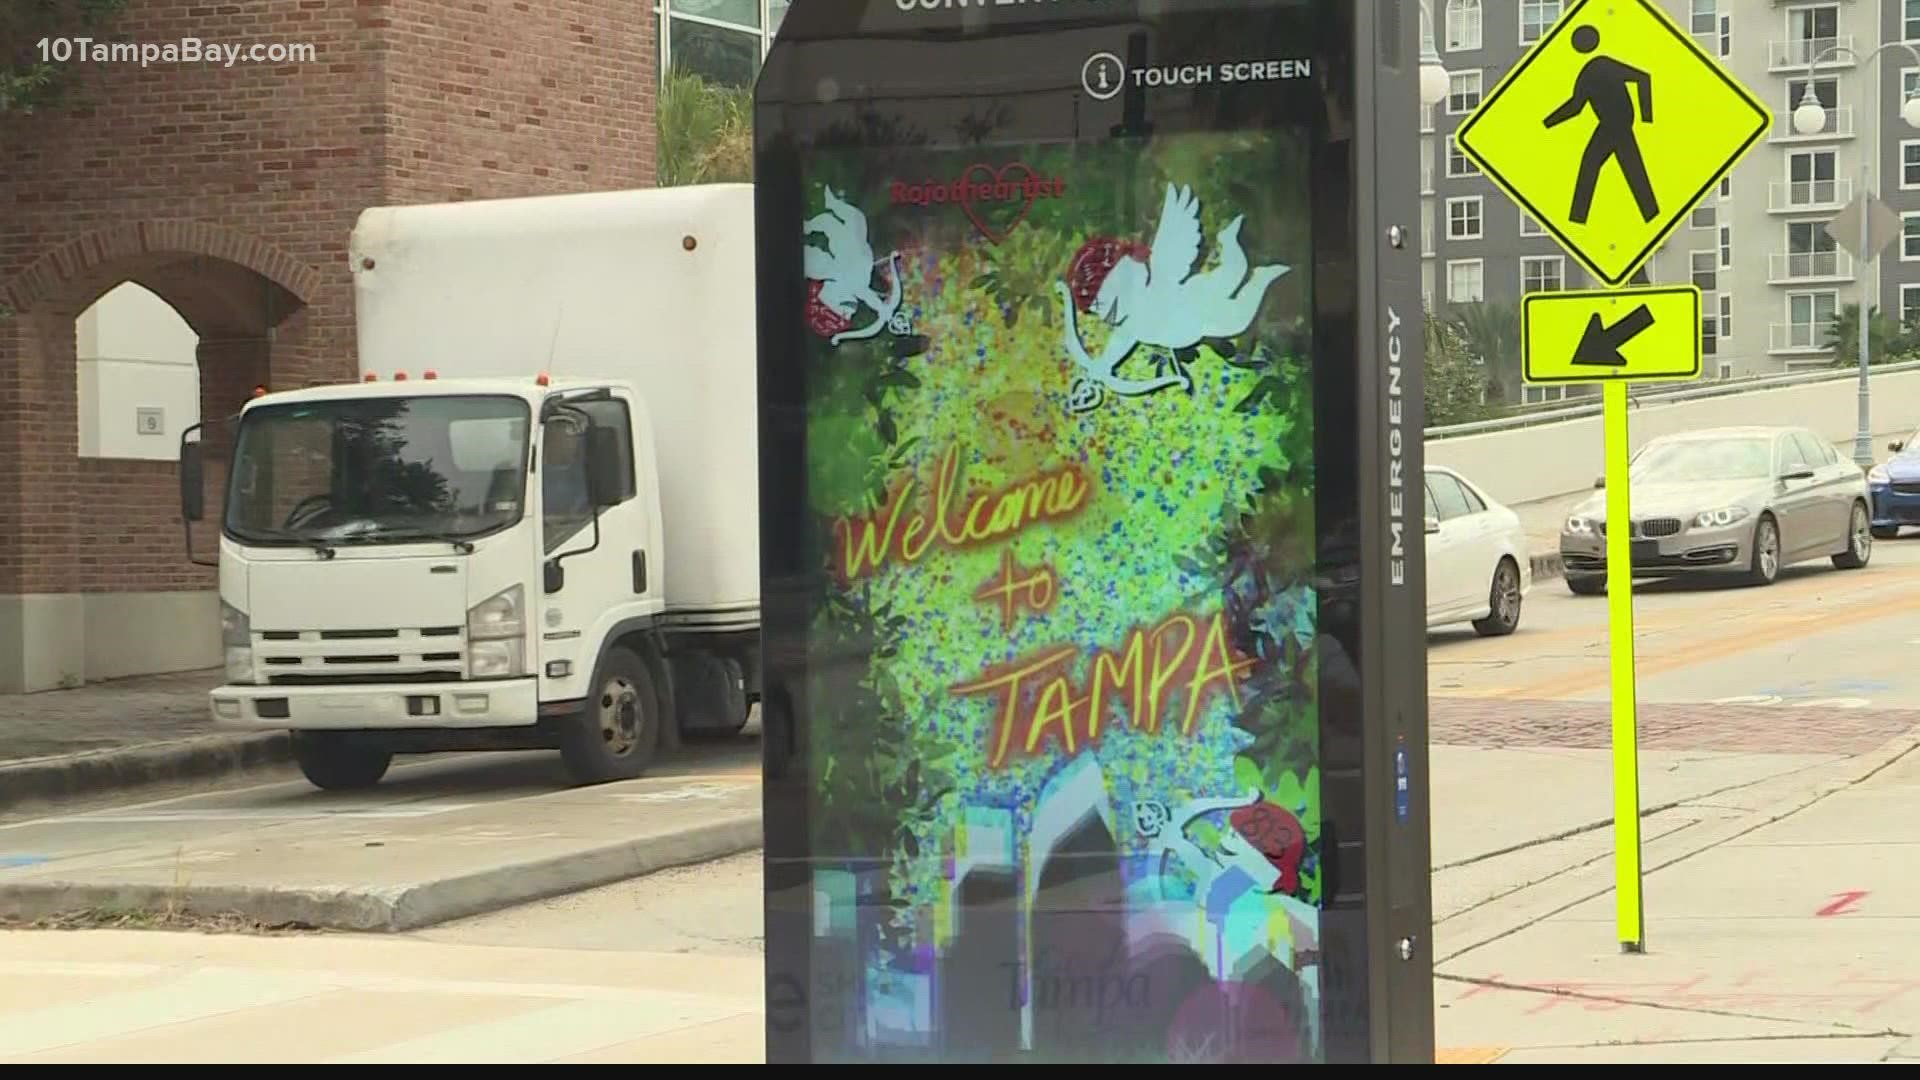 30 flat screen electronic kiosks are being installed all over Tampa.